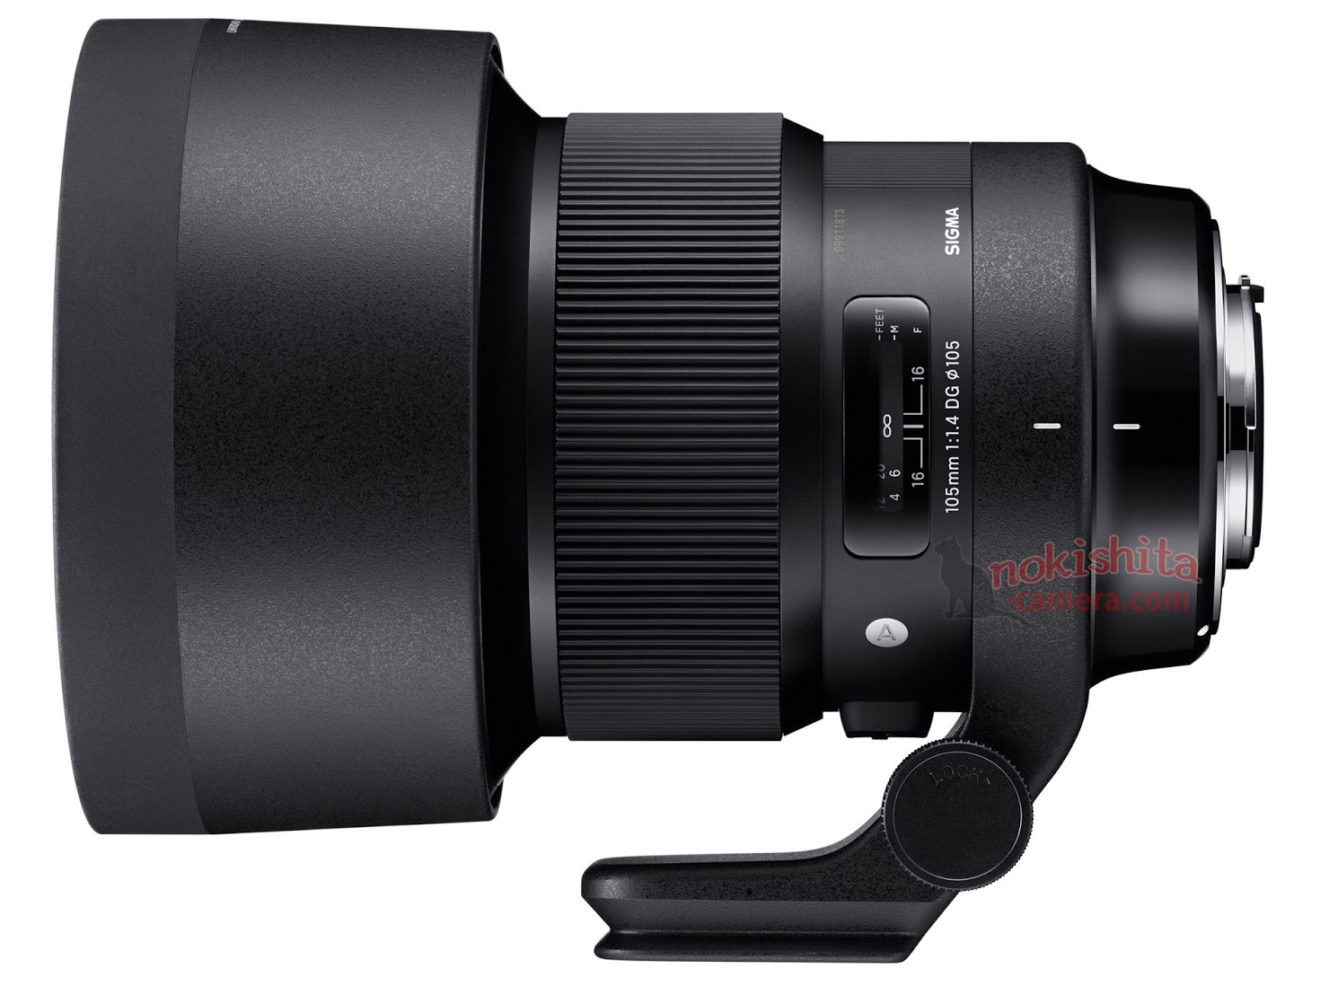 (SR5) Leaked! First image of the new Sony 18-110mm f/4.0 G 